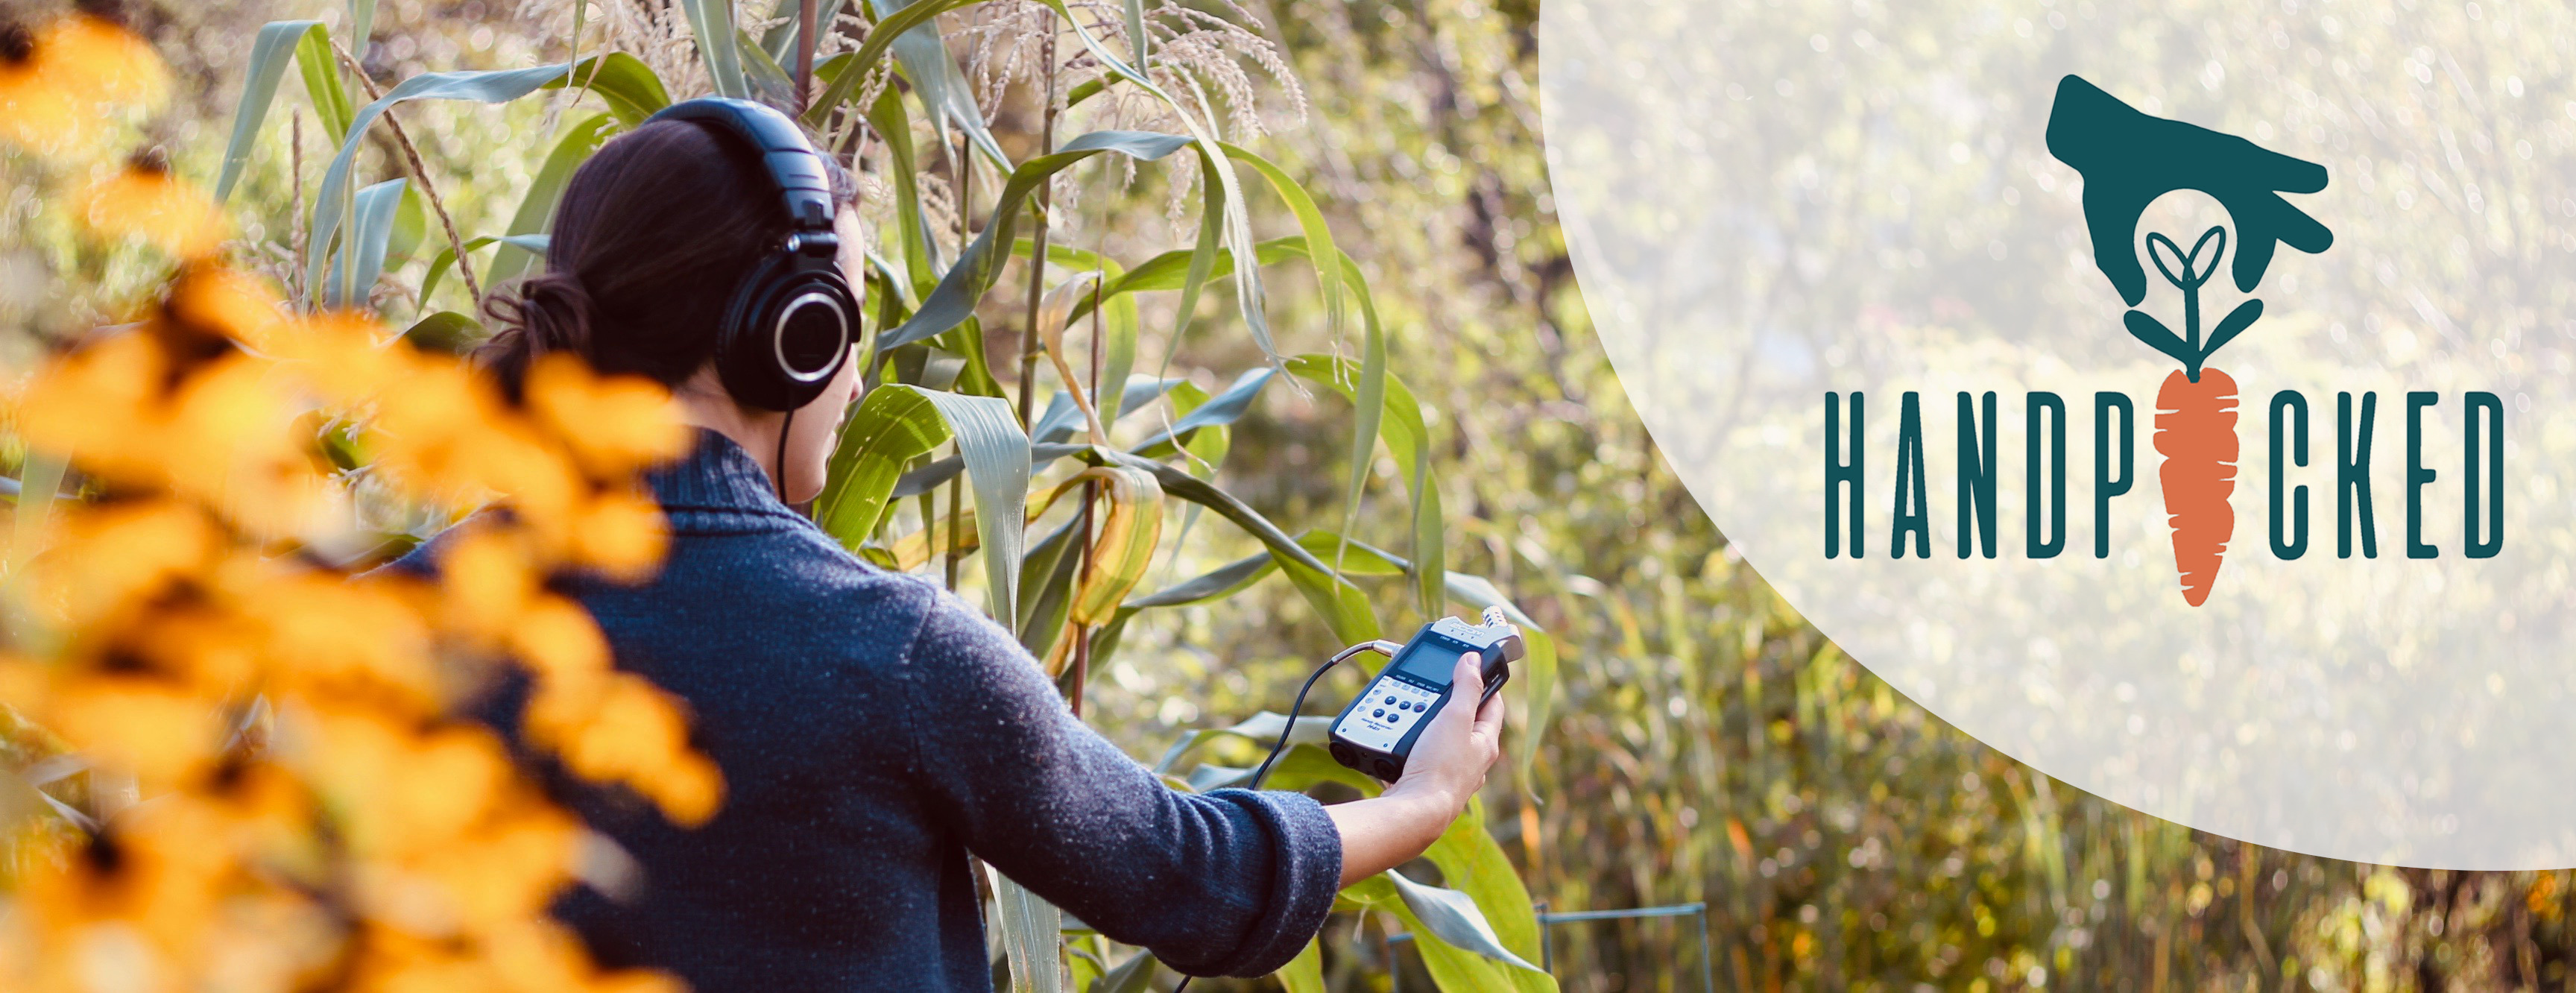 A woman with dark hair in a bun and wearing a sweater and headphones holds a handheld audio recorder while standing in a field with tall green plants